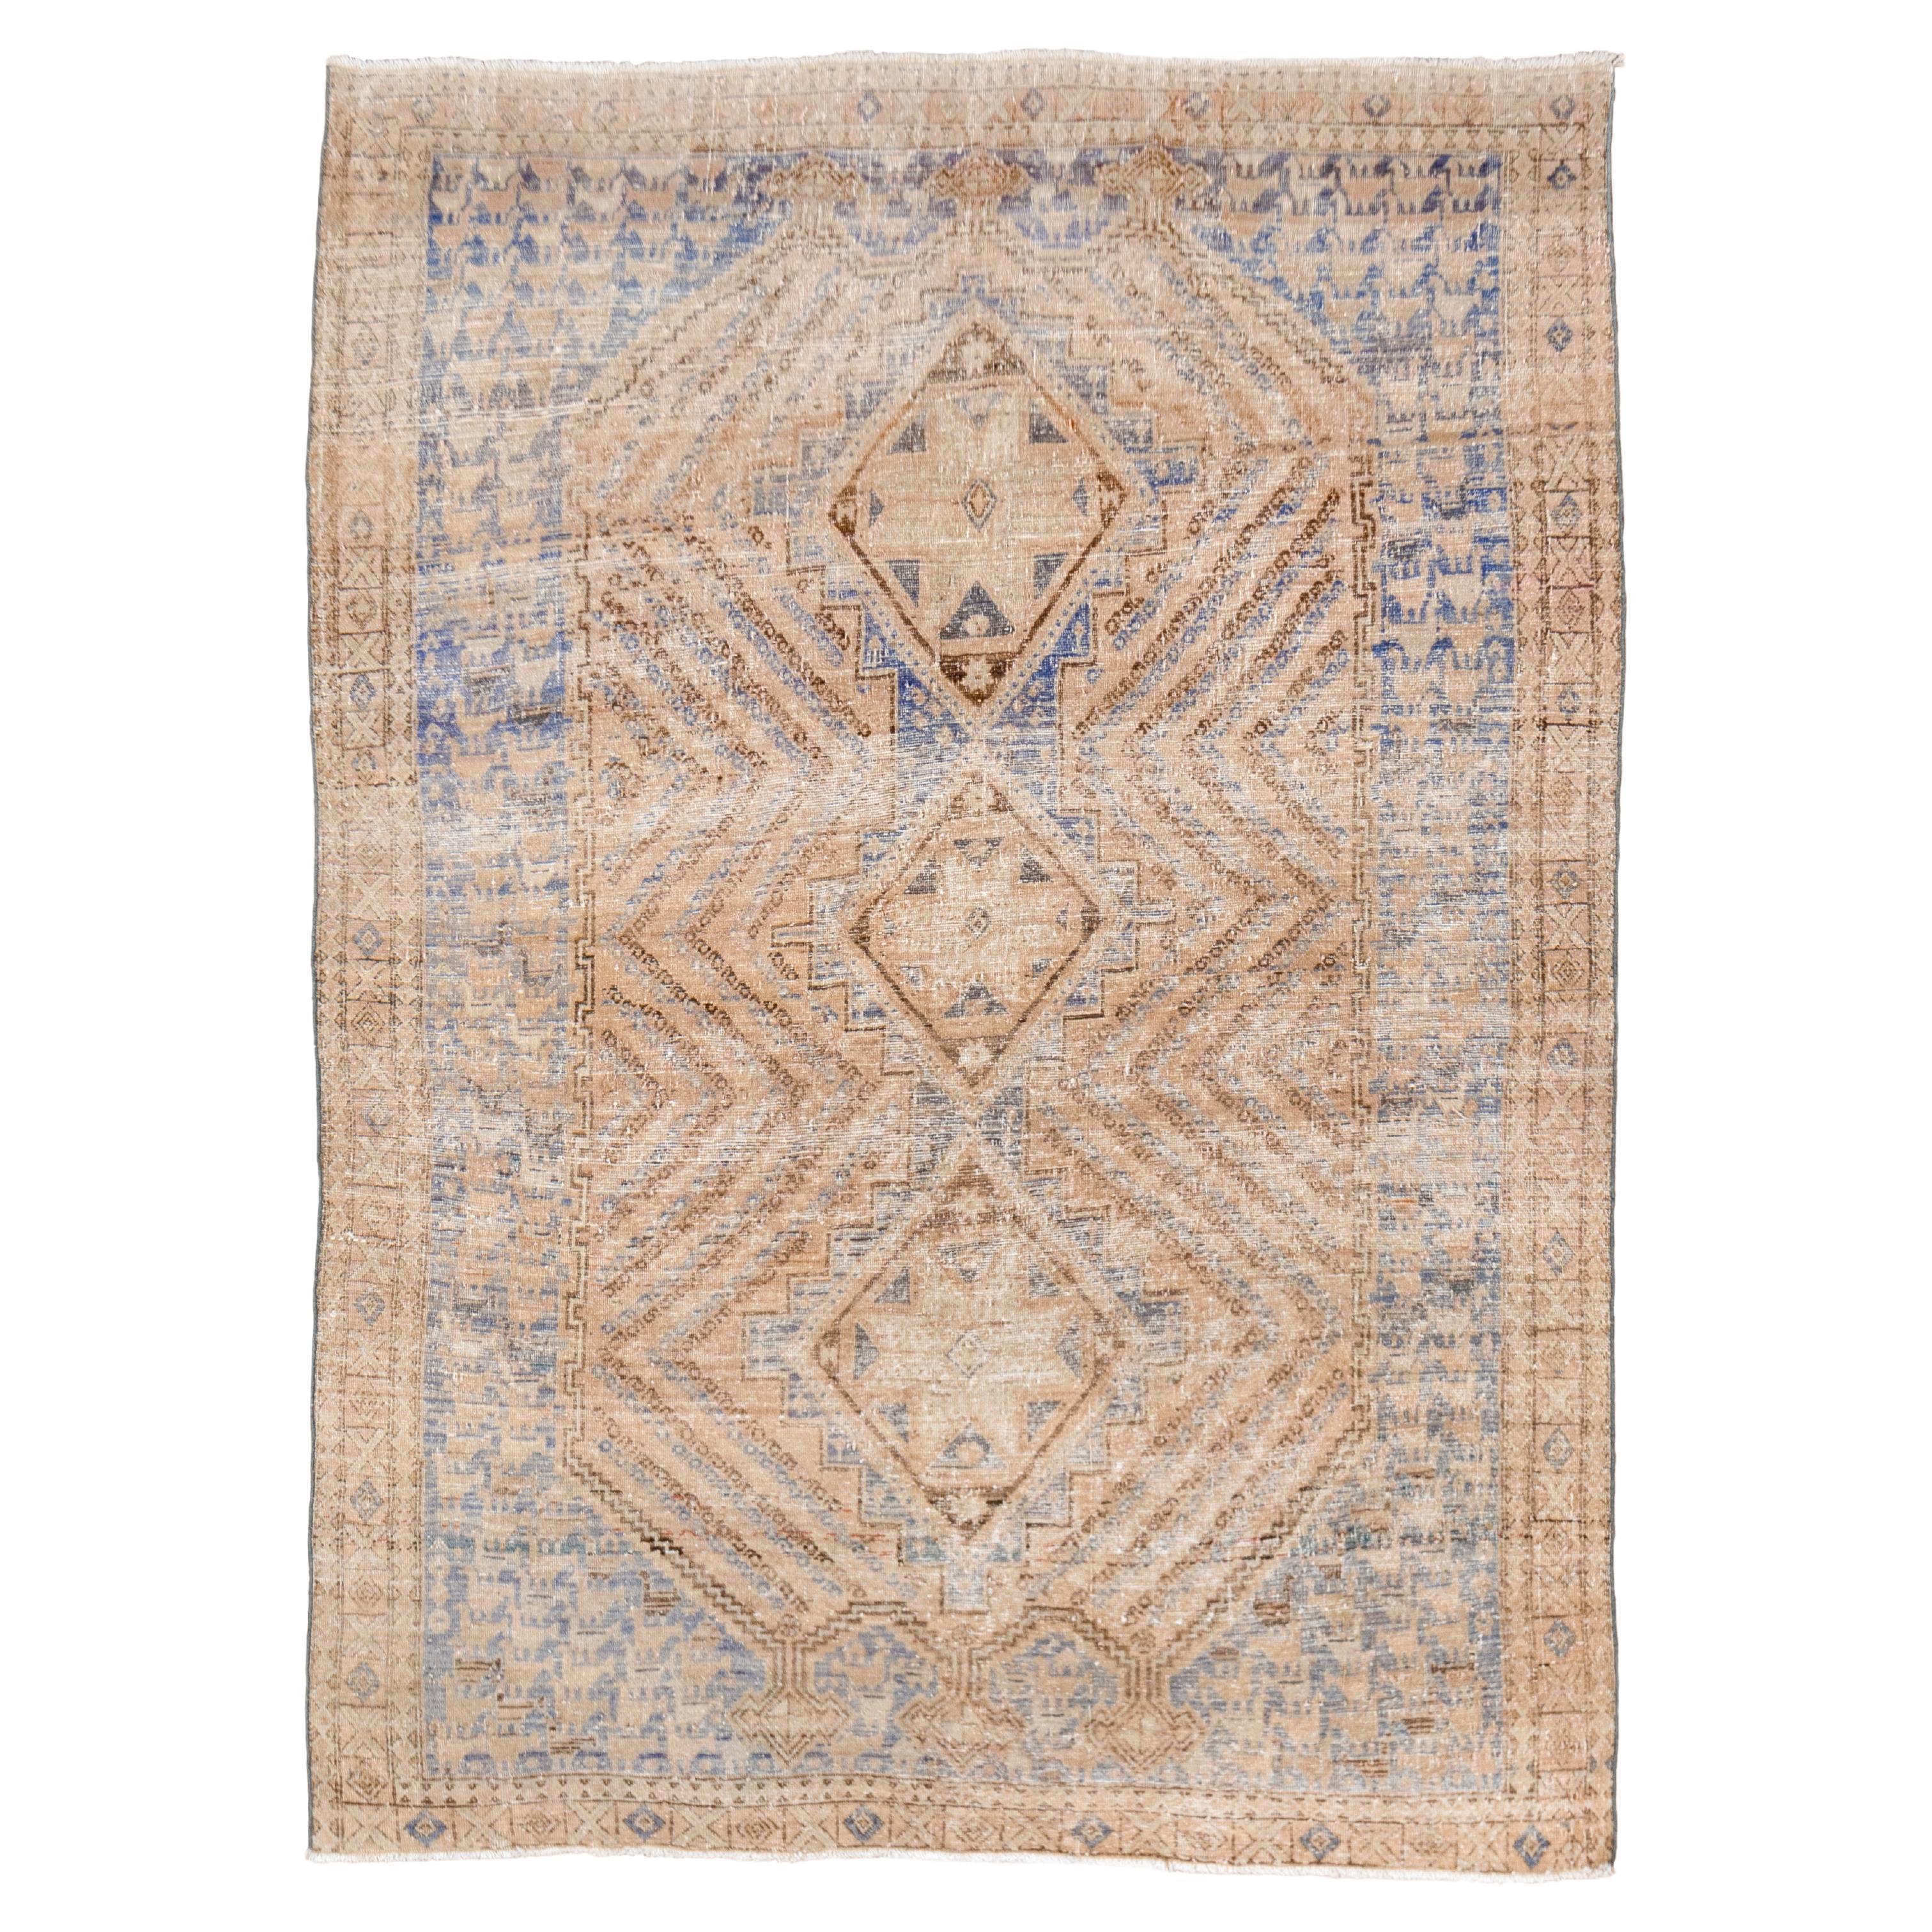 Eliko Rugs by David Ariel Persian Antique Afshar Scatter Rug, Neutral Tones (Tons neutres)